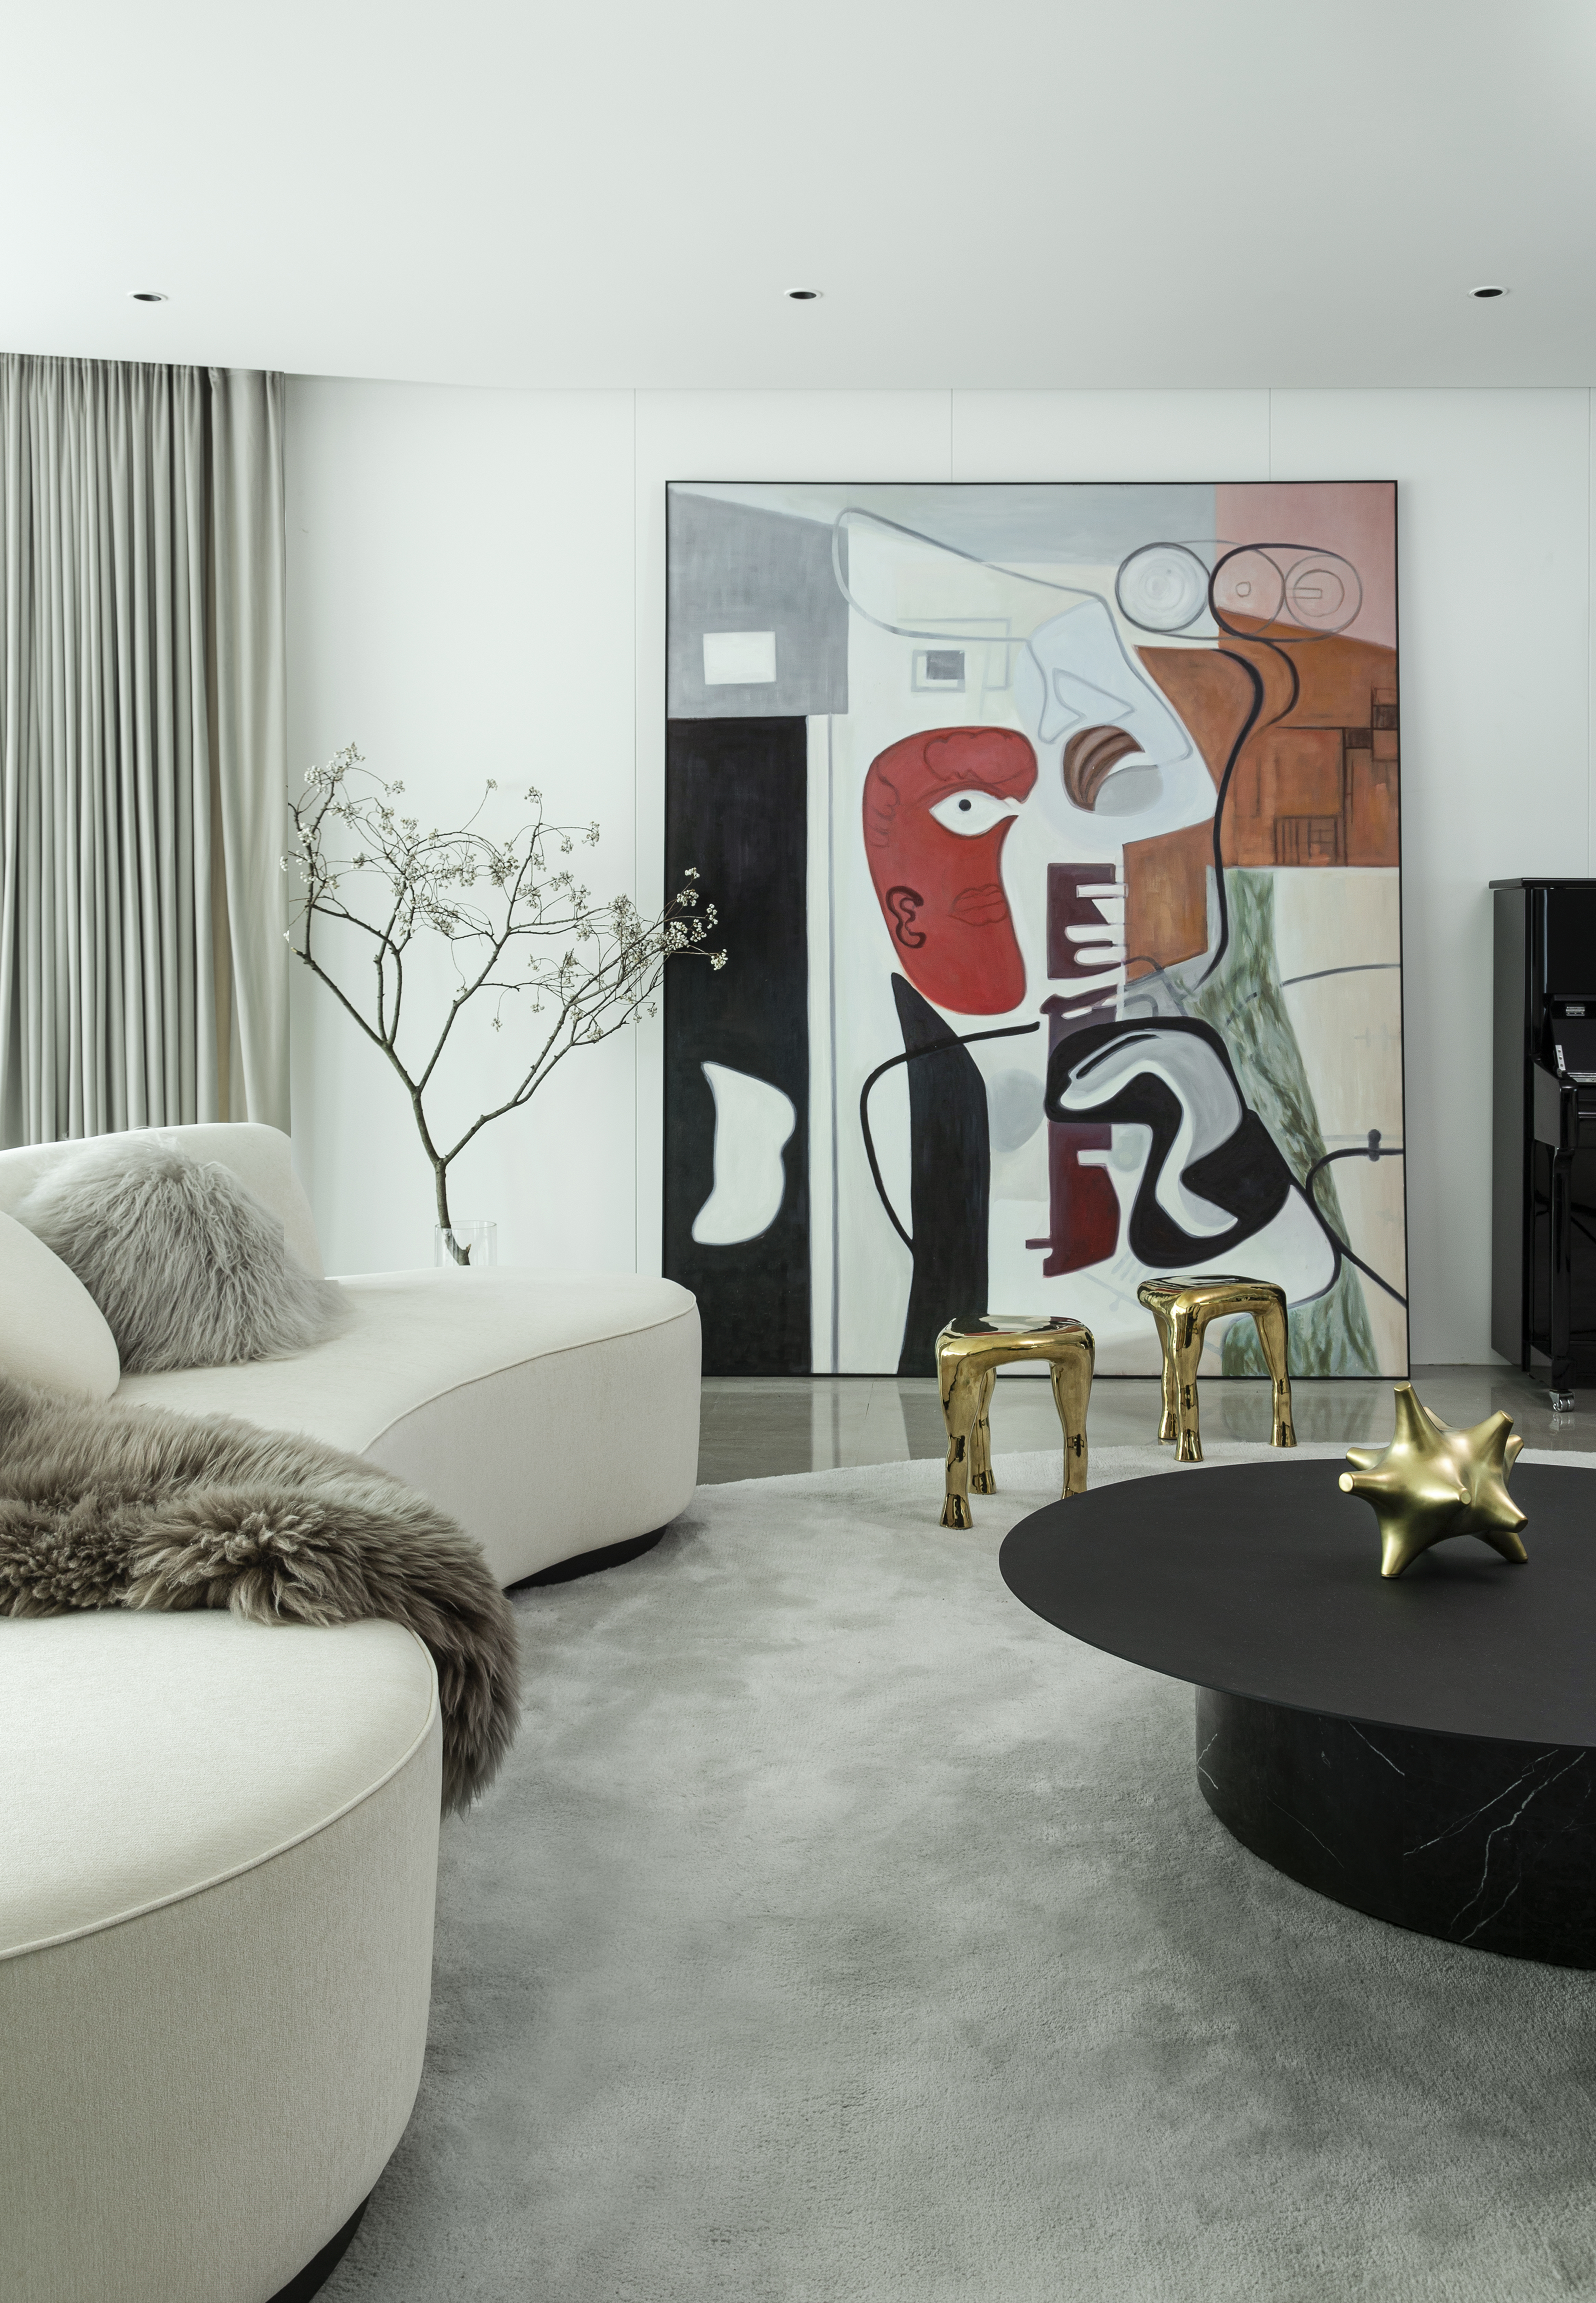 The pursuit of happiness reflected in the luxury apartment by Muxin Studio - Living Rooom Area